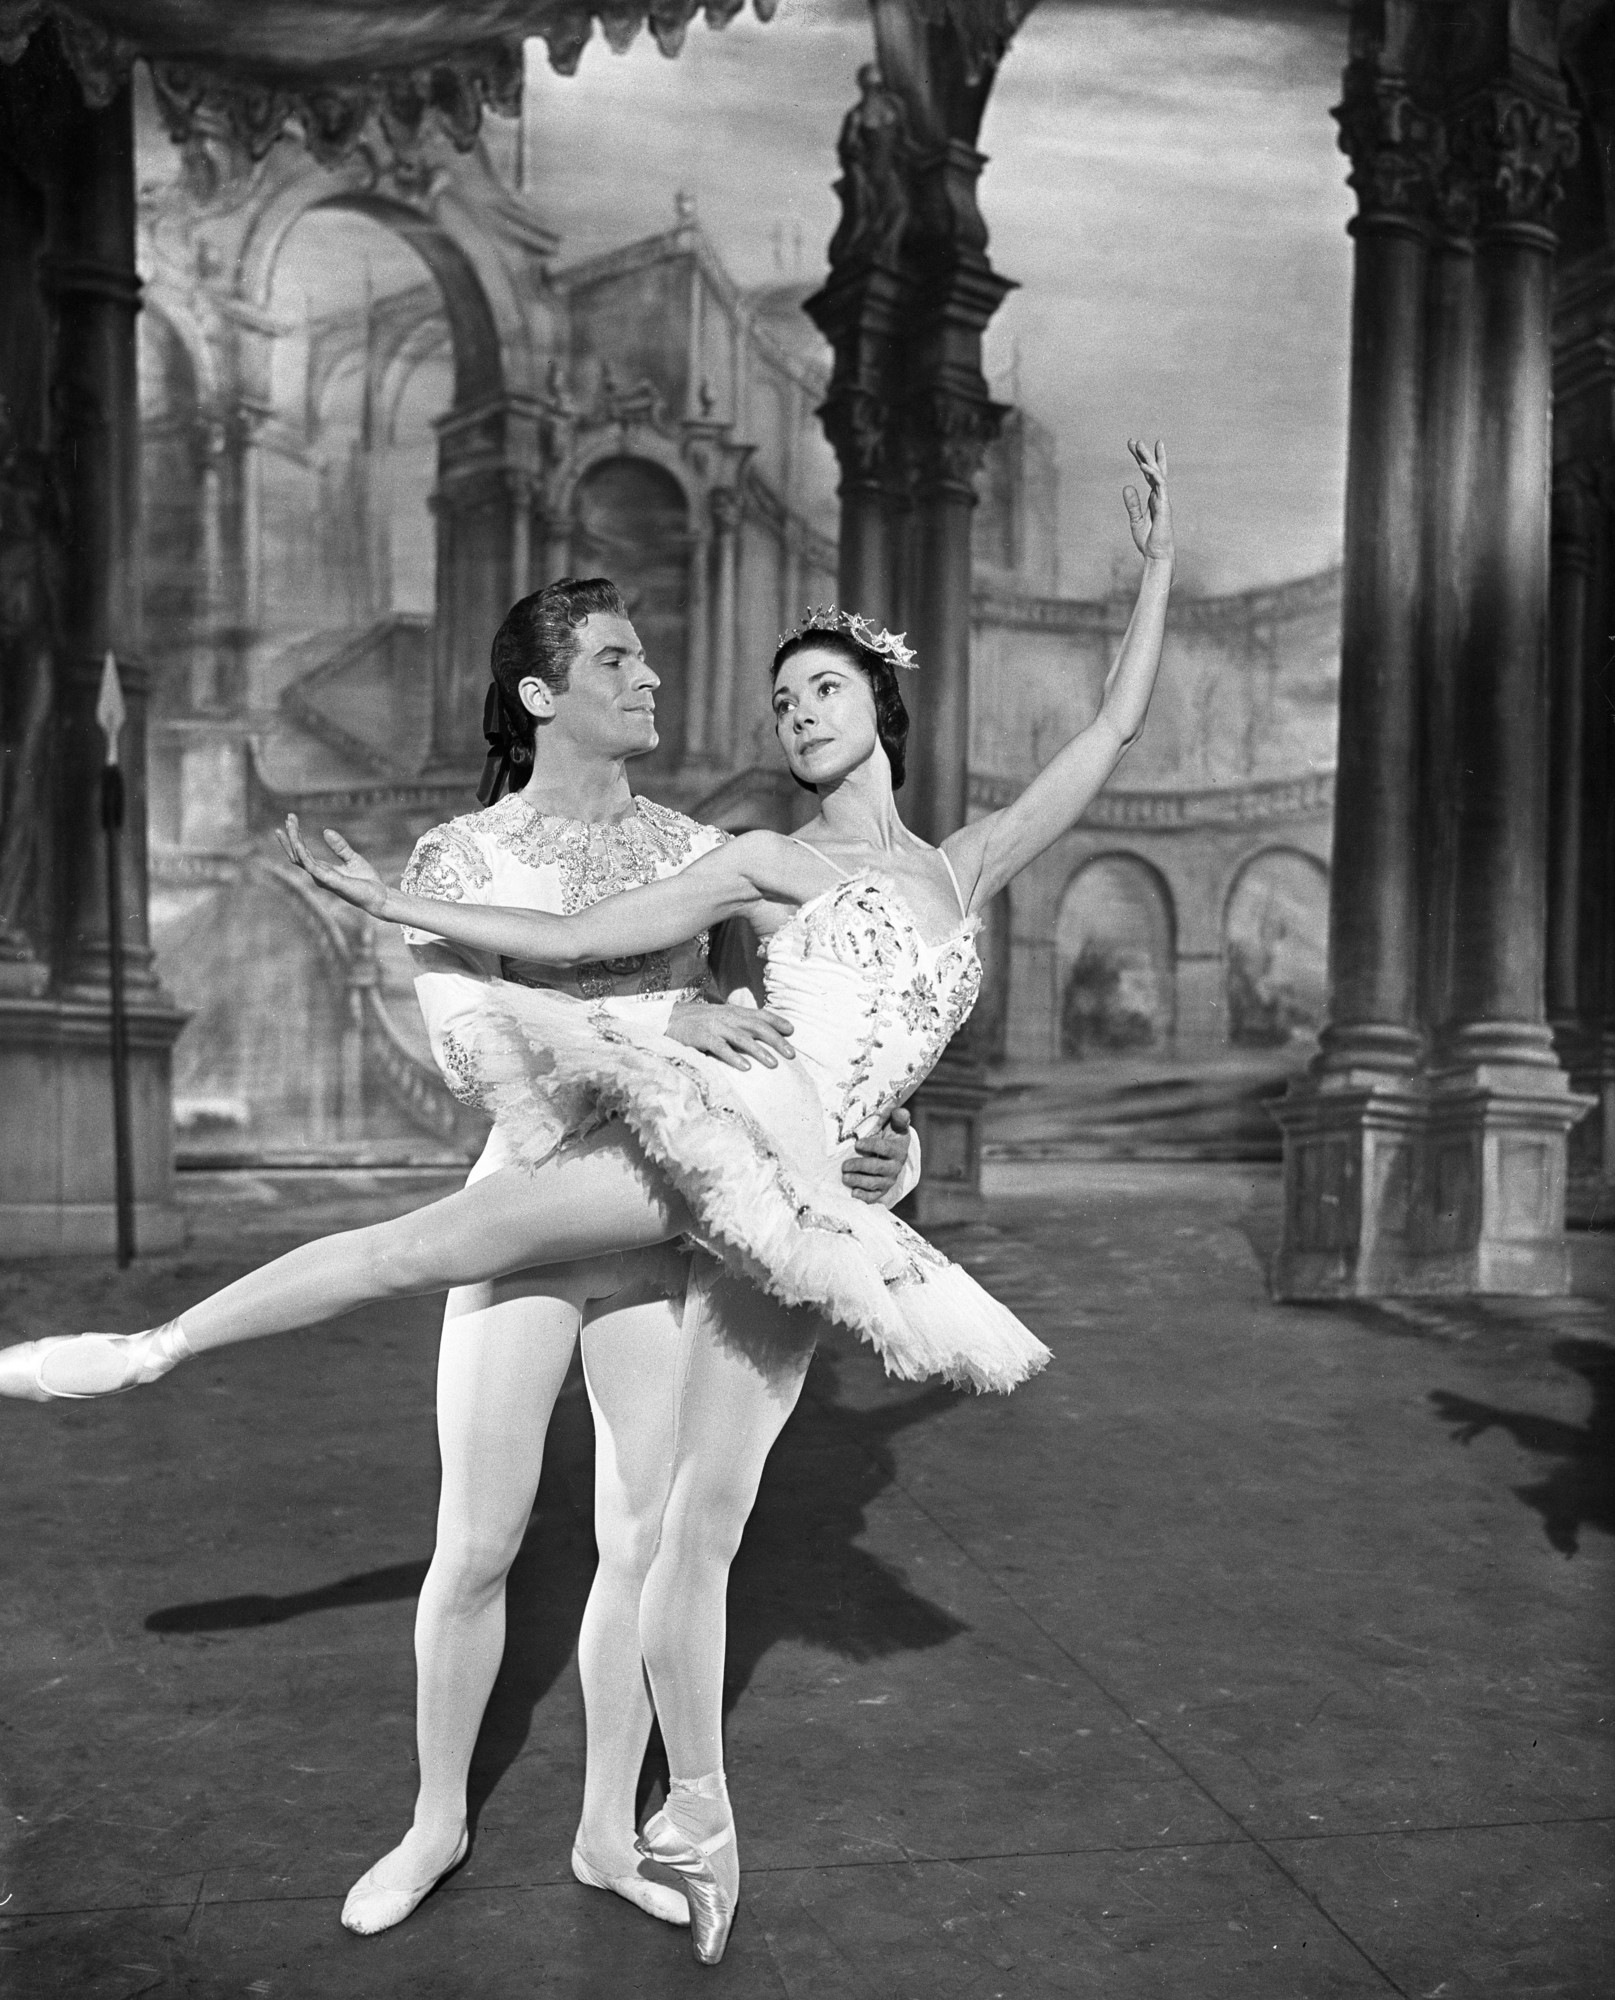 Margot Fonteyn and Michael Somes in The Sleeping Beauty (1959)